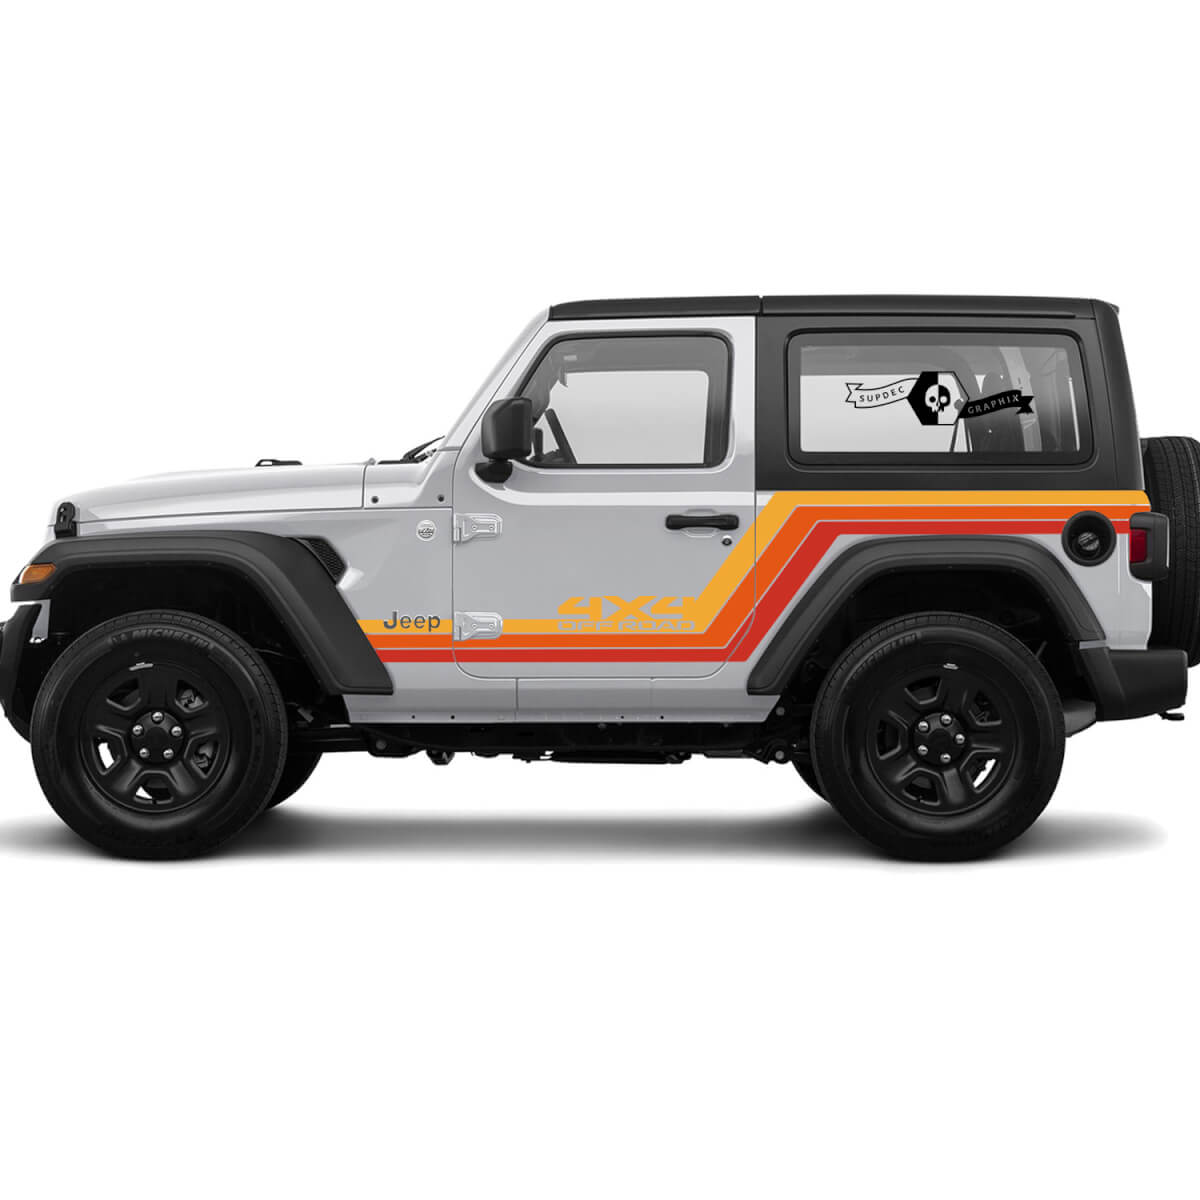 Jeep Rubicon Retro Vintage 4x4 Offroad 2 Doors Racing Stripe Kit Long Off Road Graphic Kits